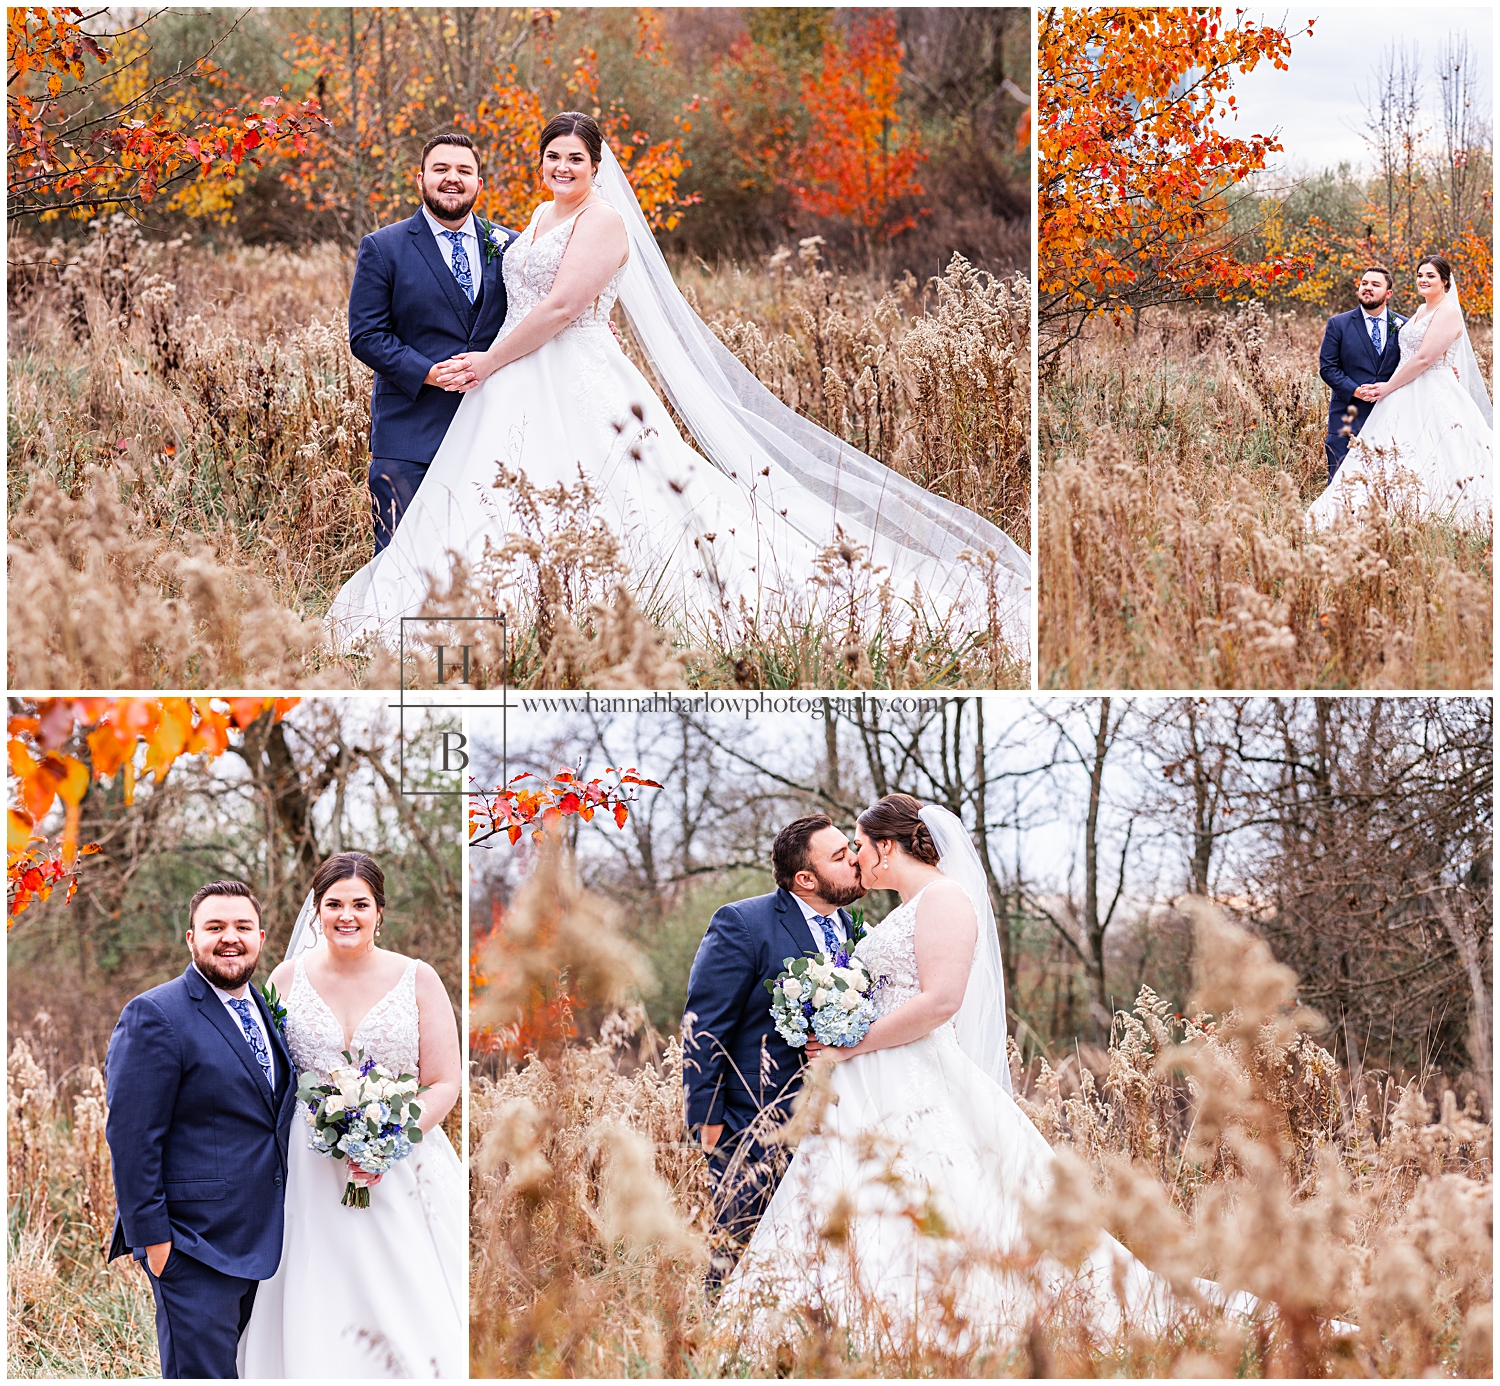 Bride and groom pose in fall dead foliage for beautiful wedding photos